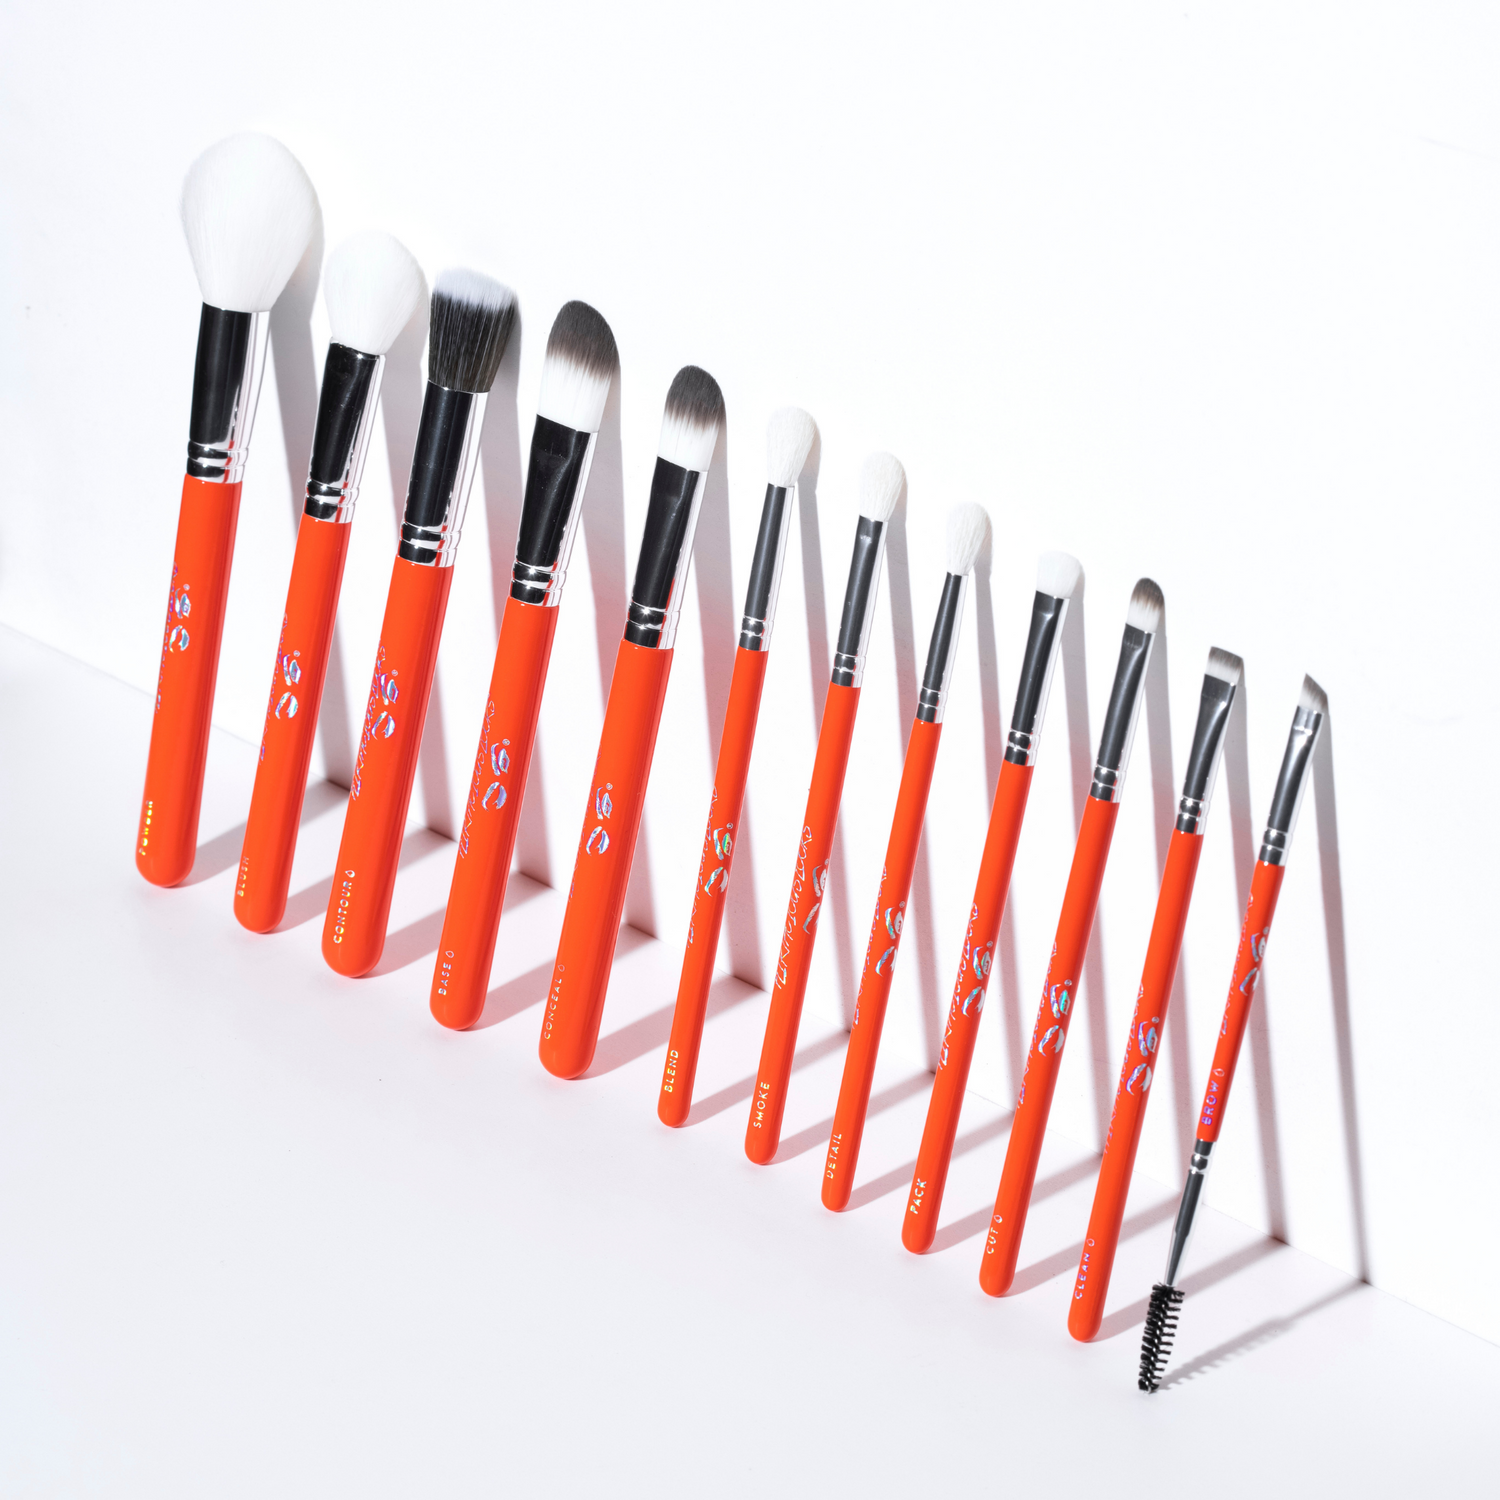 The Elite 12 Brush Set Collection